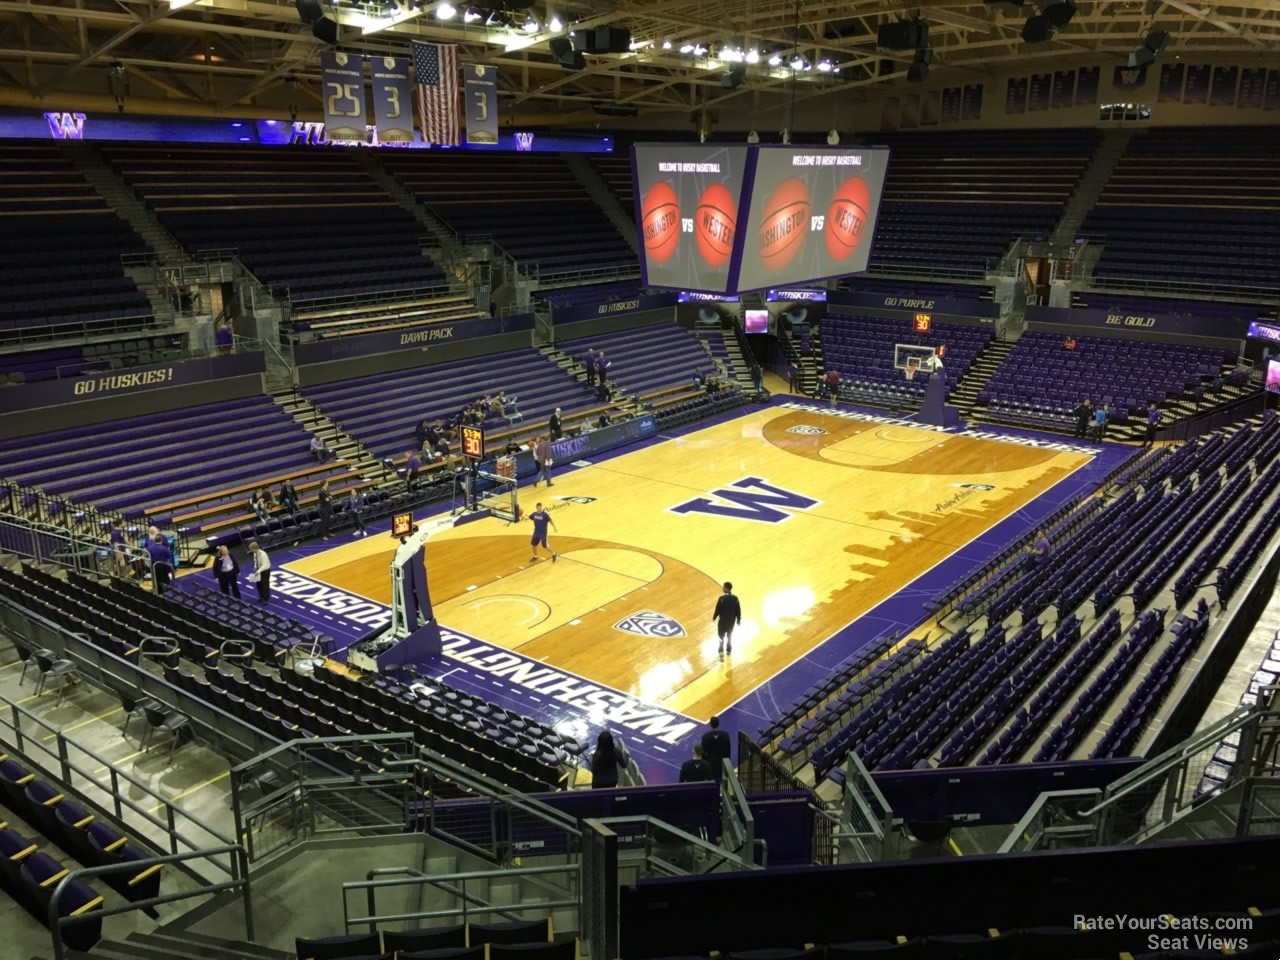 Section 10 at Alaska Airlines Arena